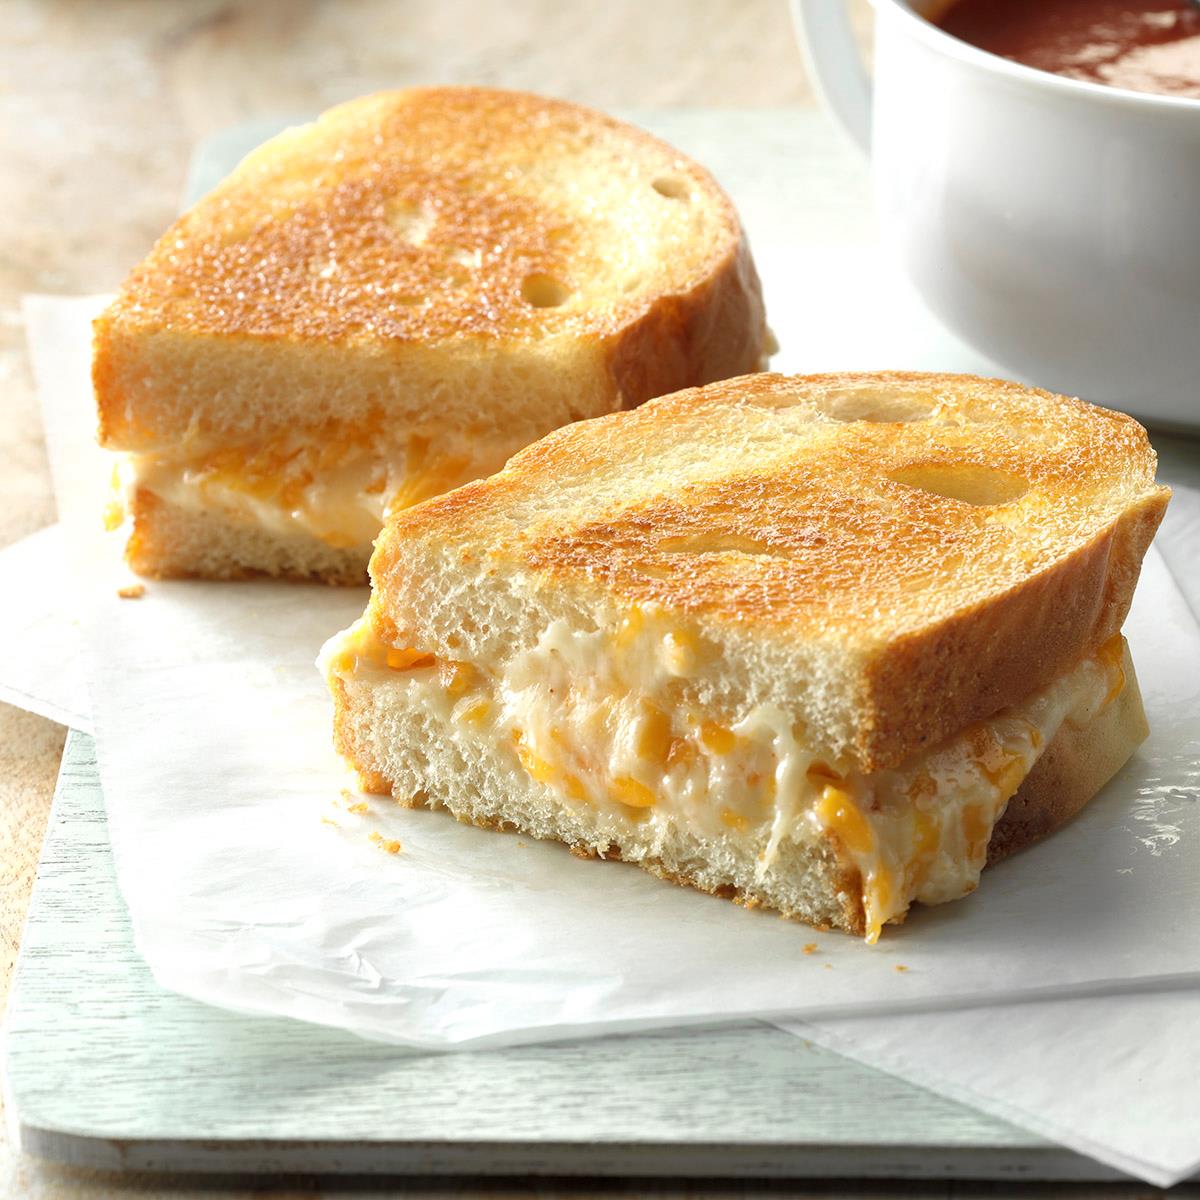 These gooey grilled cheese sandwiches taste great for lunch with sliced apples. And they're really fast to whip up, too. Here's how to make grilled cheese the right way. —Kathy Norris, Streator, Illinois <a href="https://www.tasteofhome.com/recipes/the-ultimate-grilled-cheese/">Get Recipe</a>